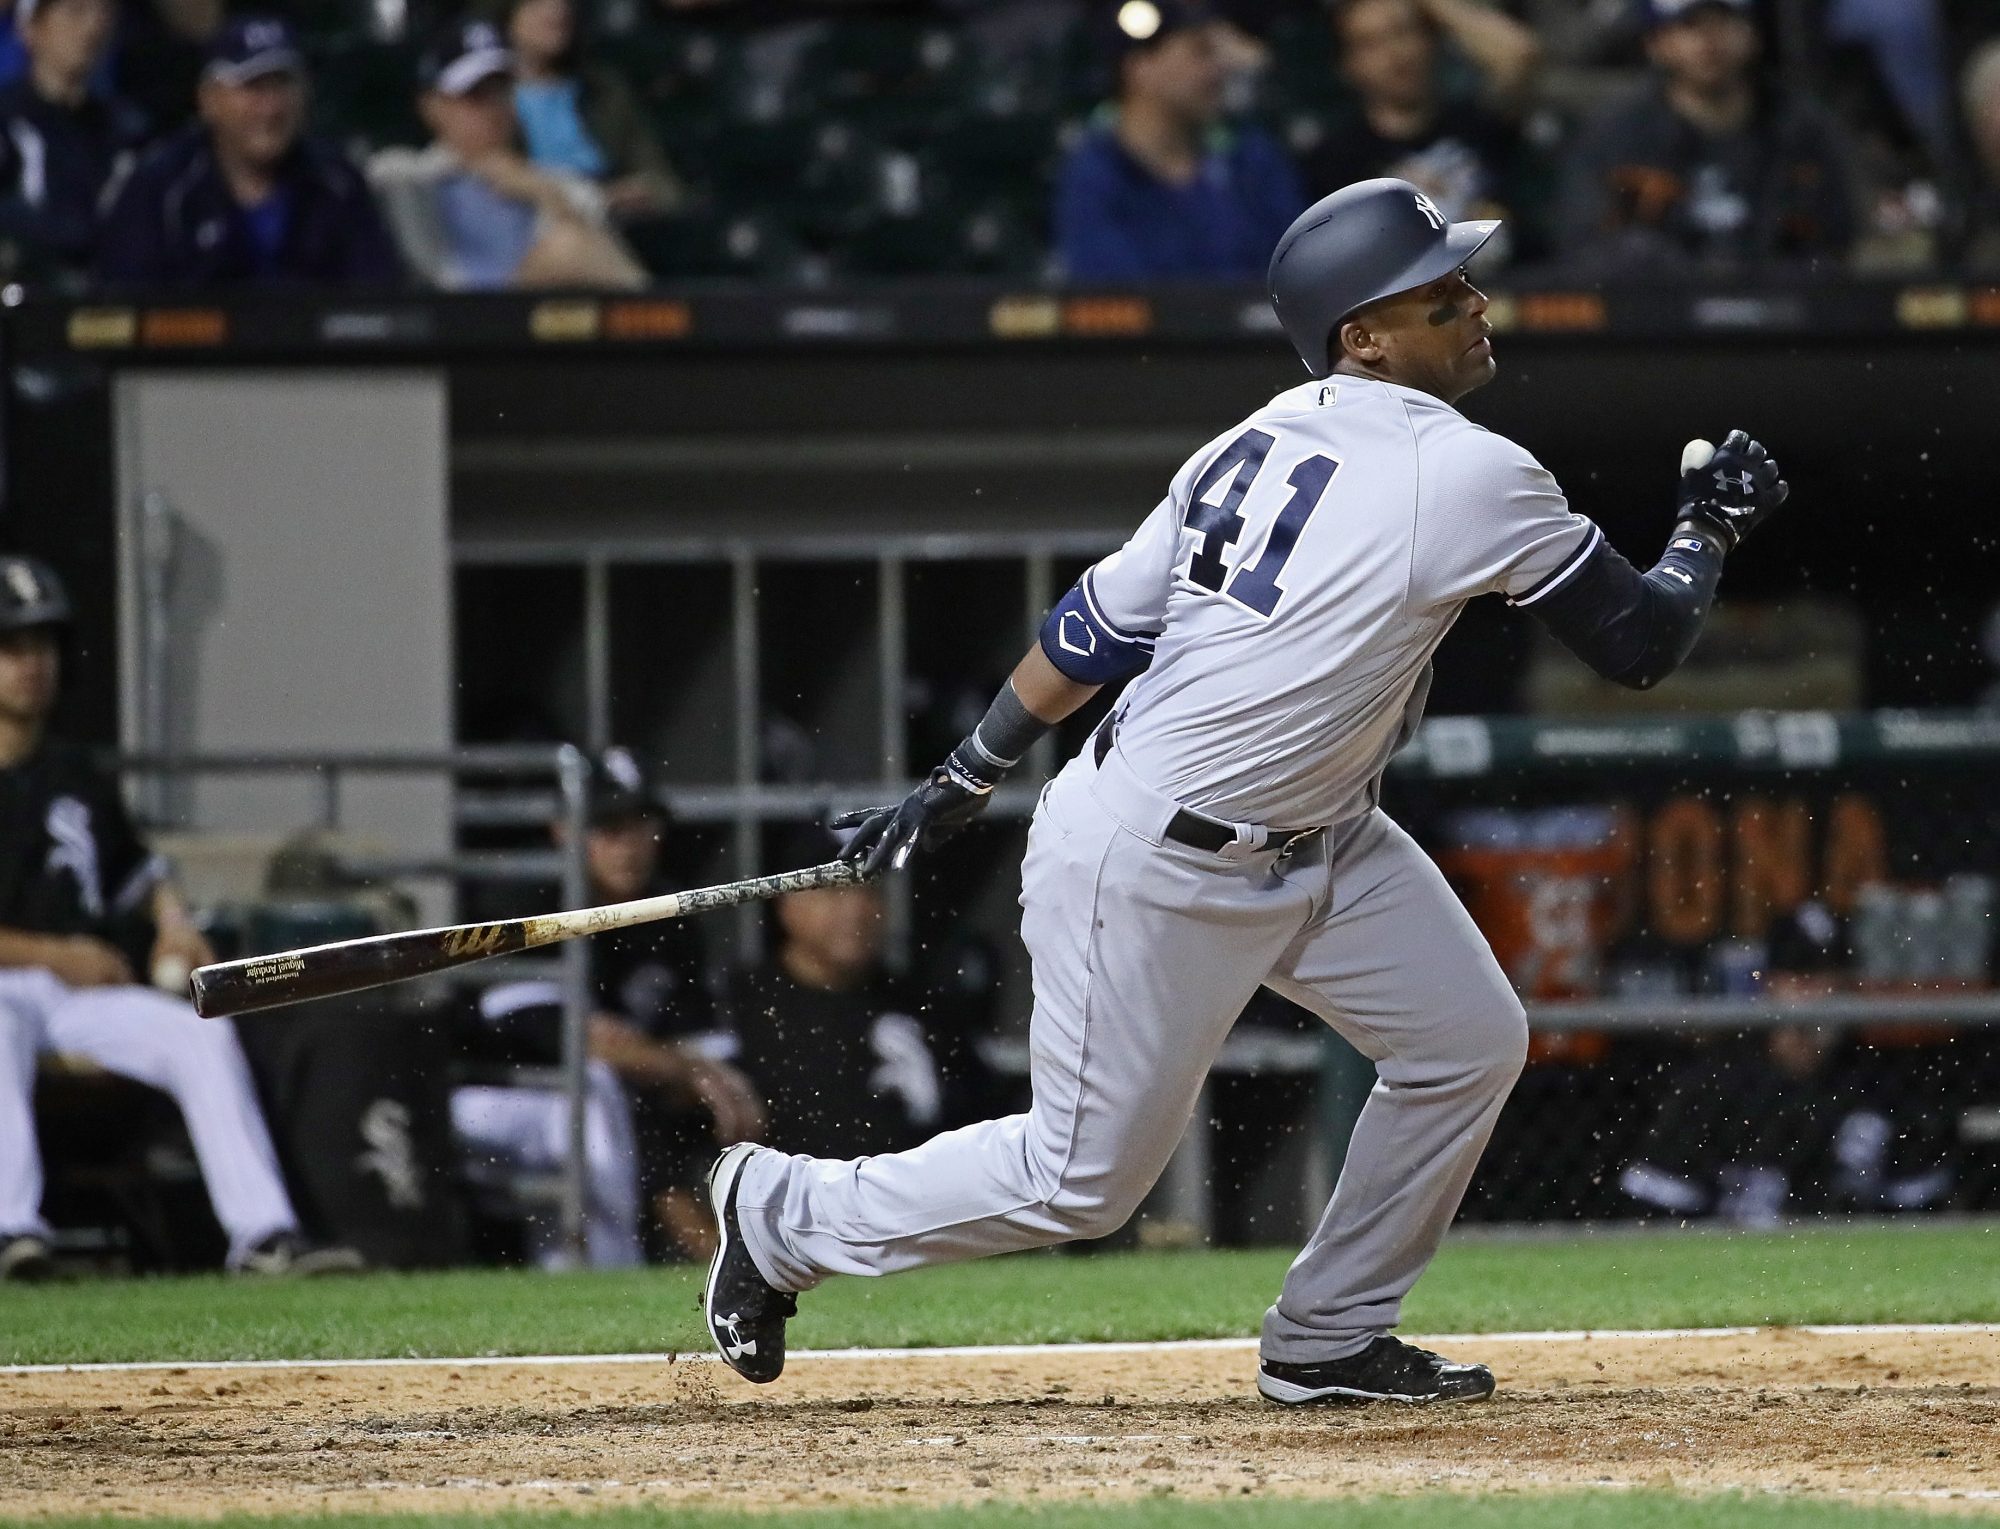 Miguel Andujar is Emerging as Arguably the Top Prospect in the New York Yankees System 2